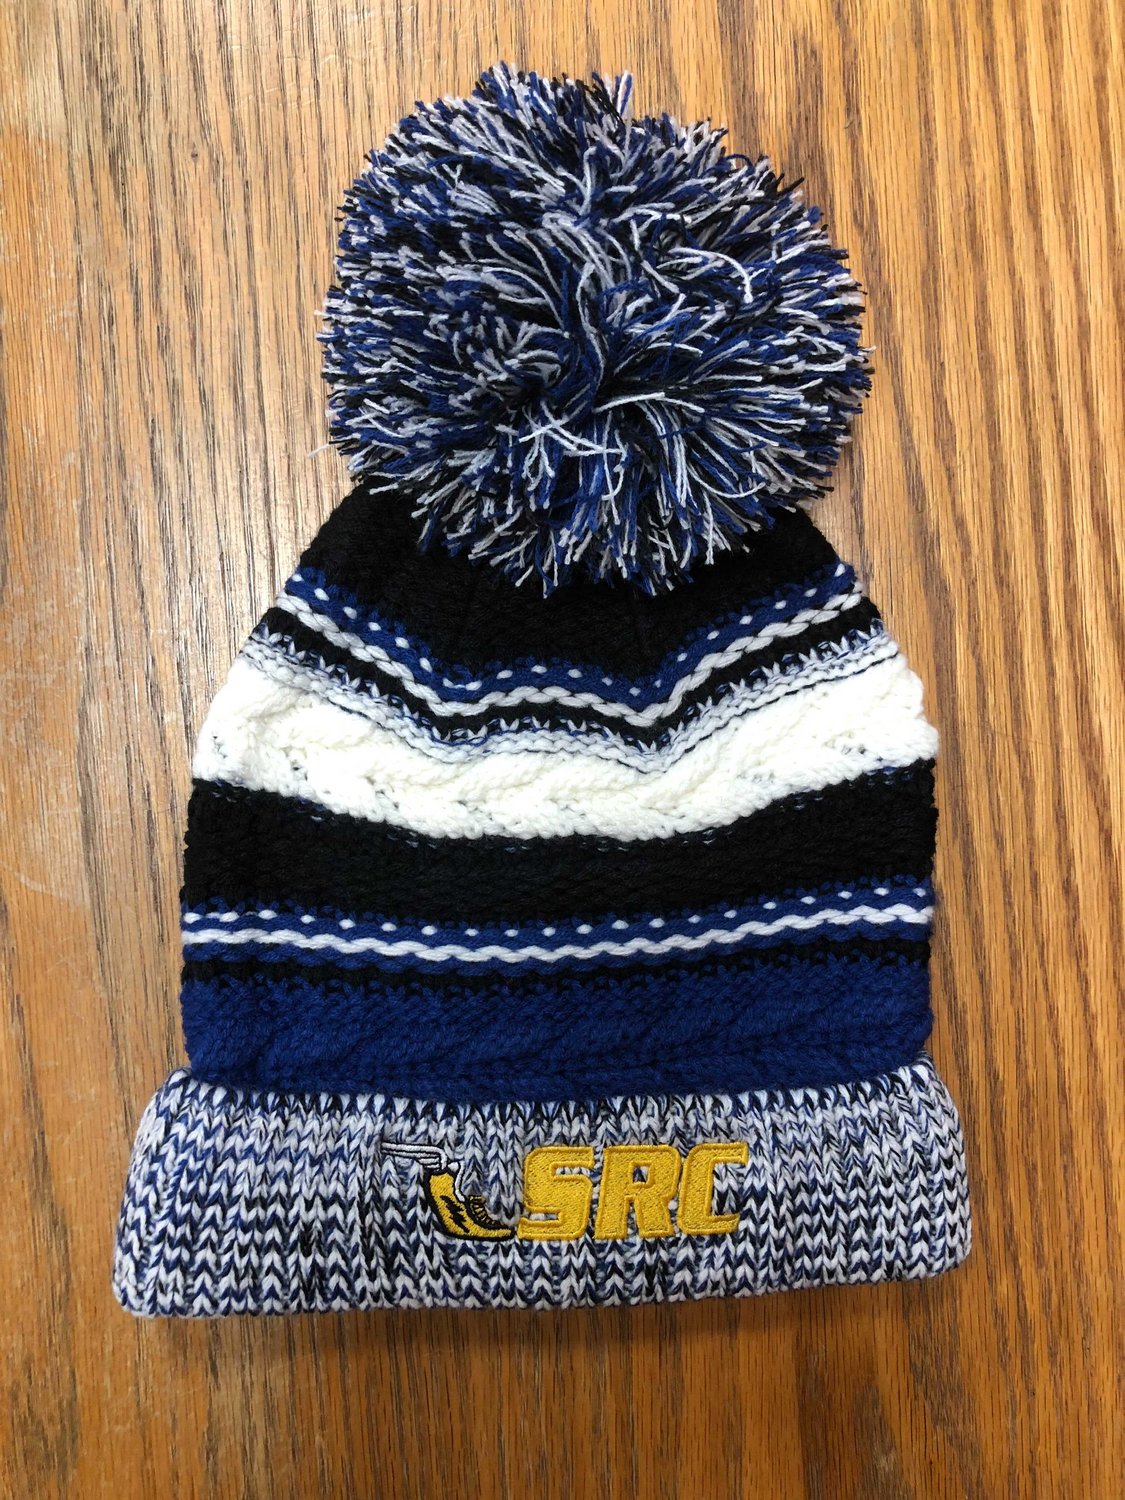 FOR HER COLD WINTER NIGHTS IN THE SWISS ALPS
Sayville Running Company
889 Montauk Hwy, Bayport
$25, SRC pom-pom Hat